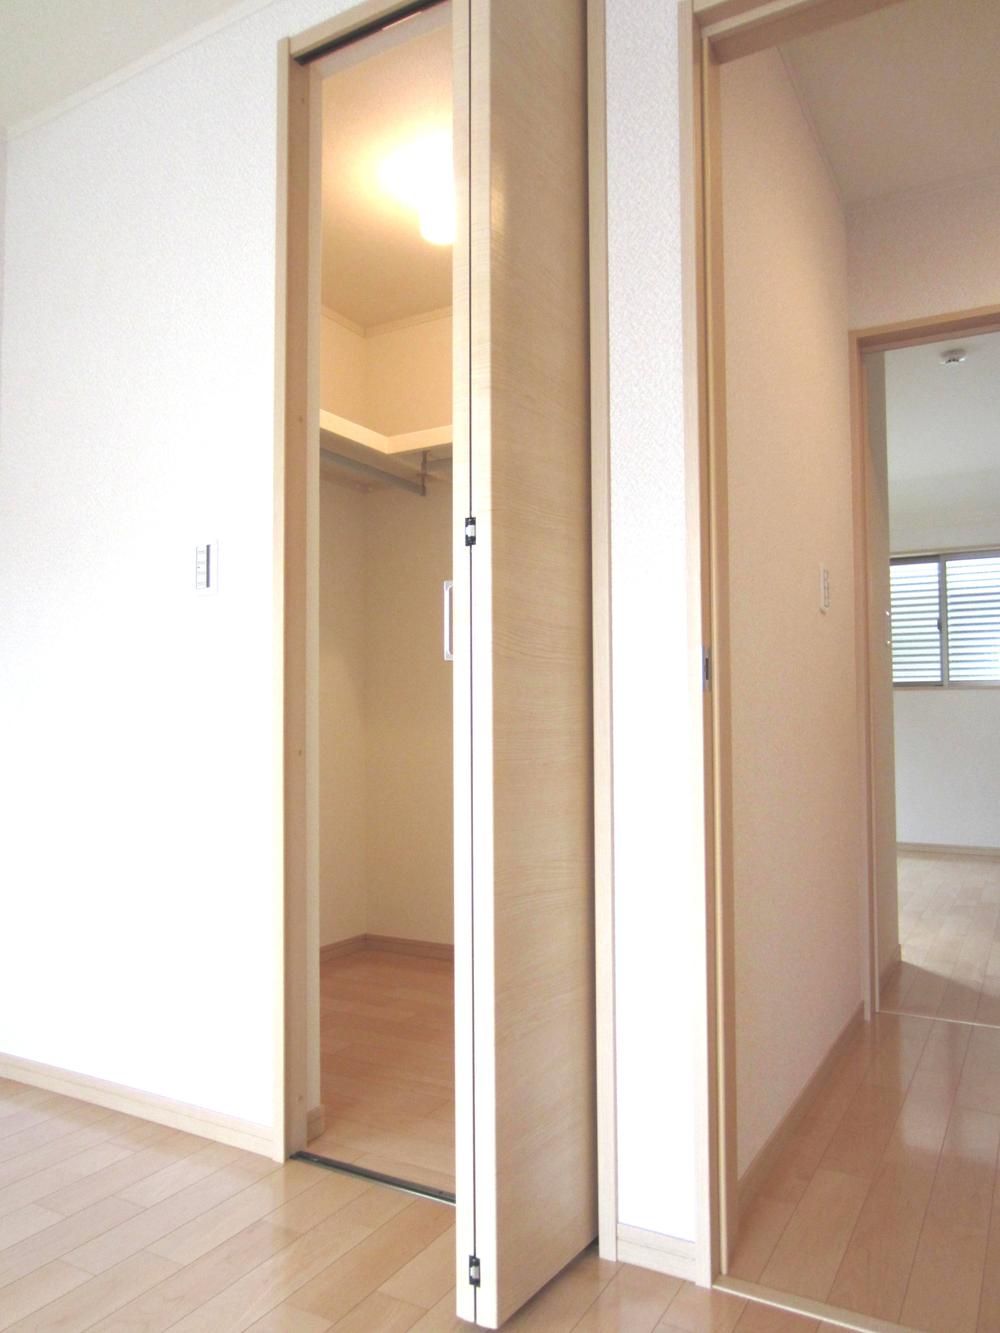 Same specifications photos (Other introspection). Walk-in closet